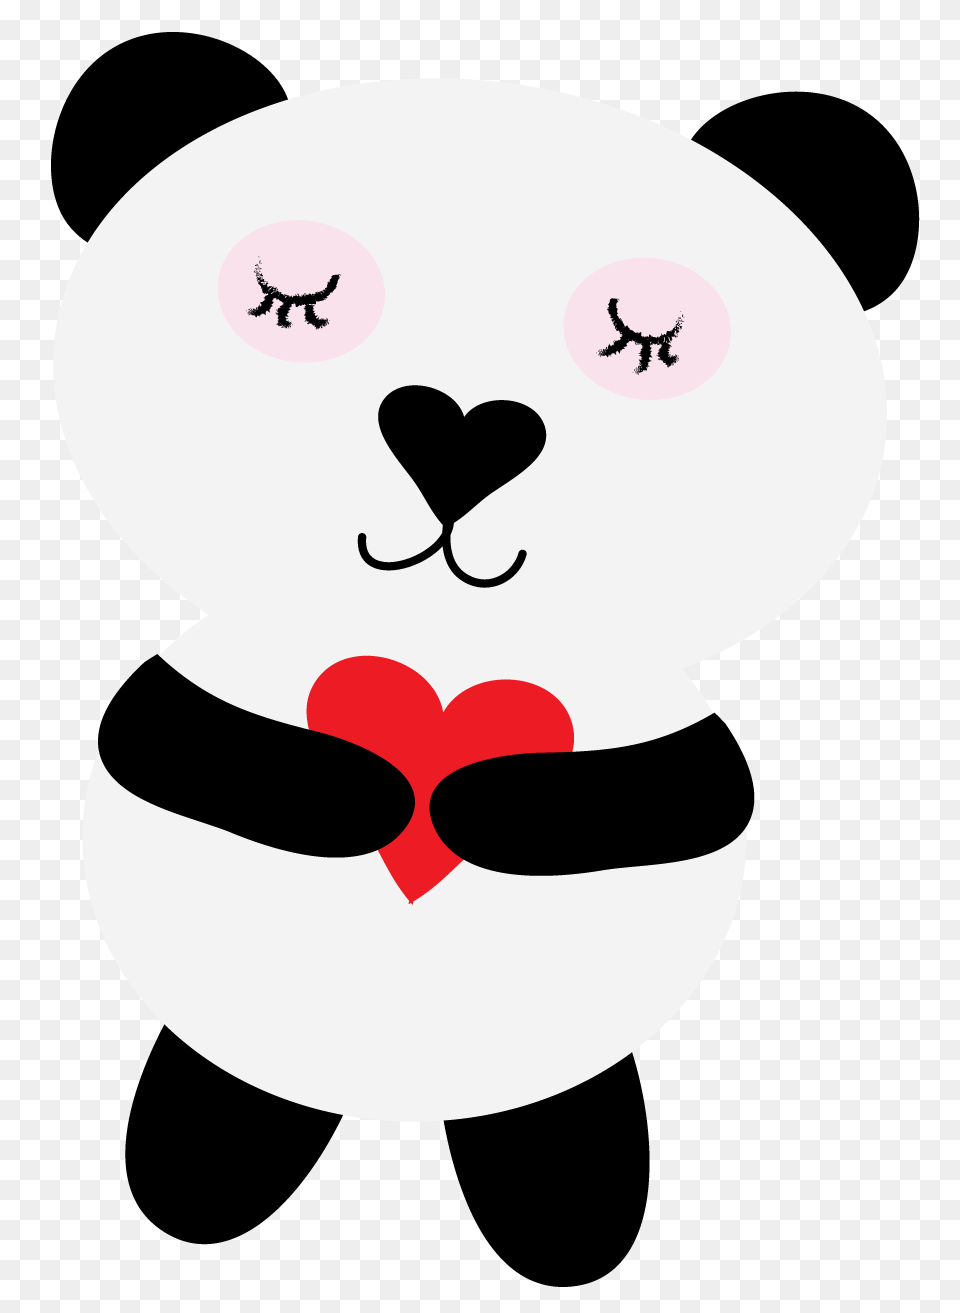 Panda Bear Clip Art From Ruby Slippers Designs Digi, Nature, Outdoors, Snow, Snowman Free Transparent Png